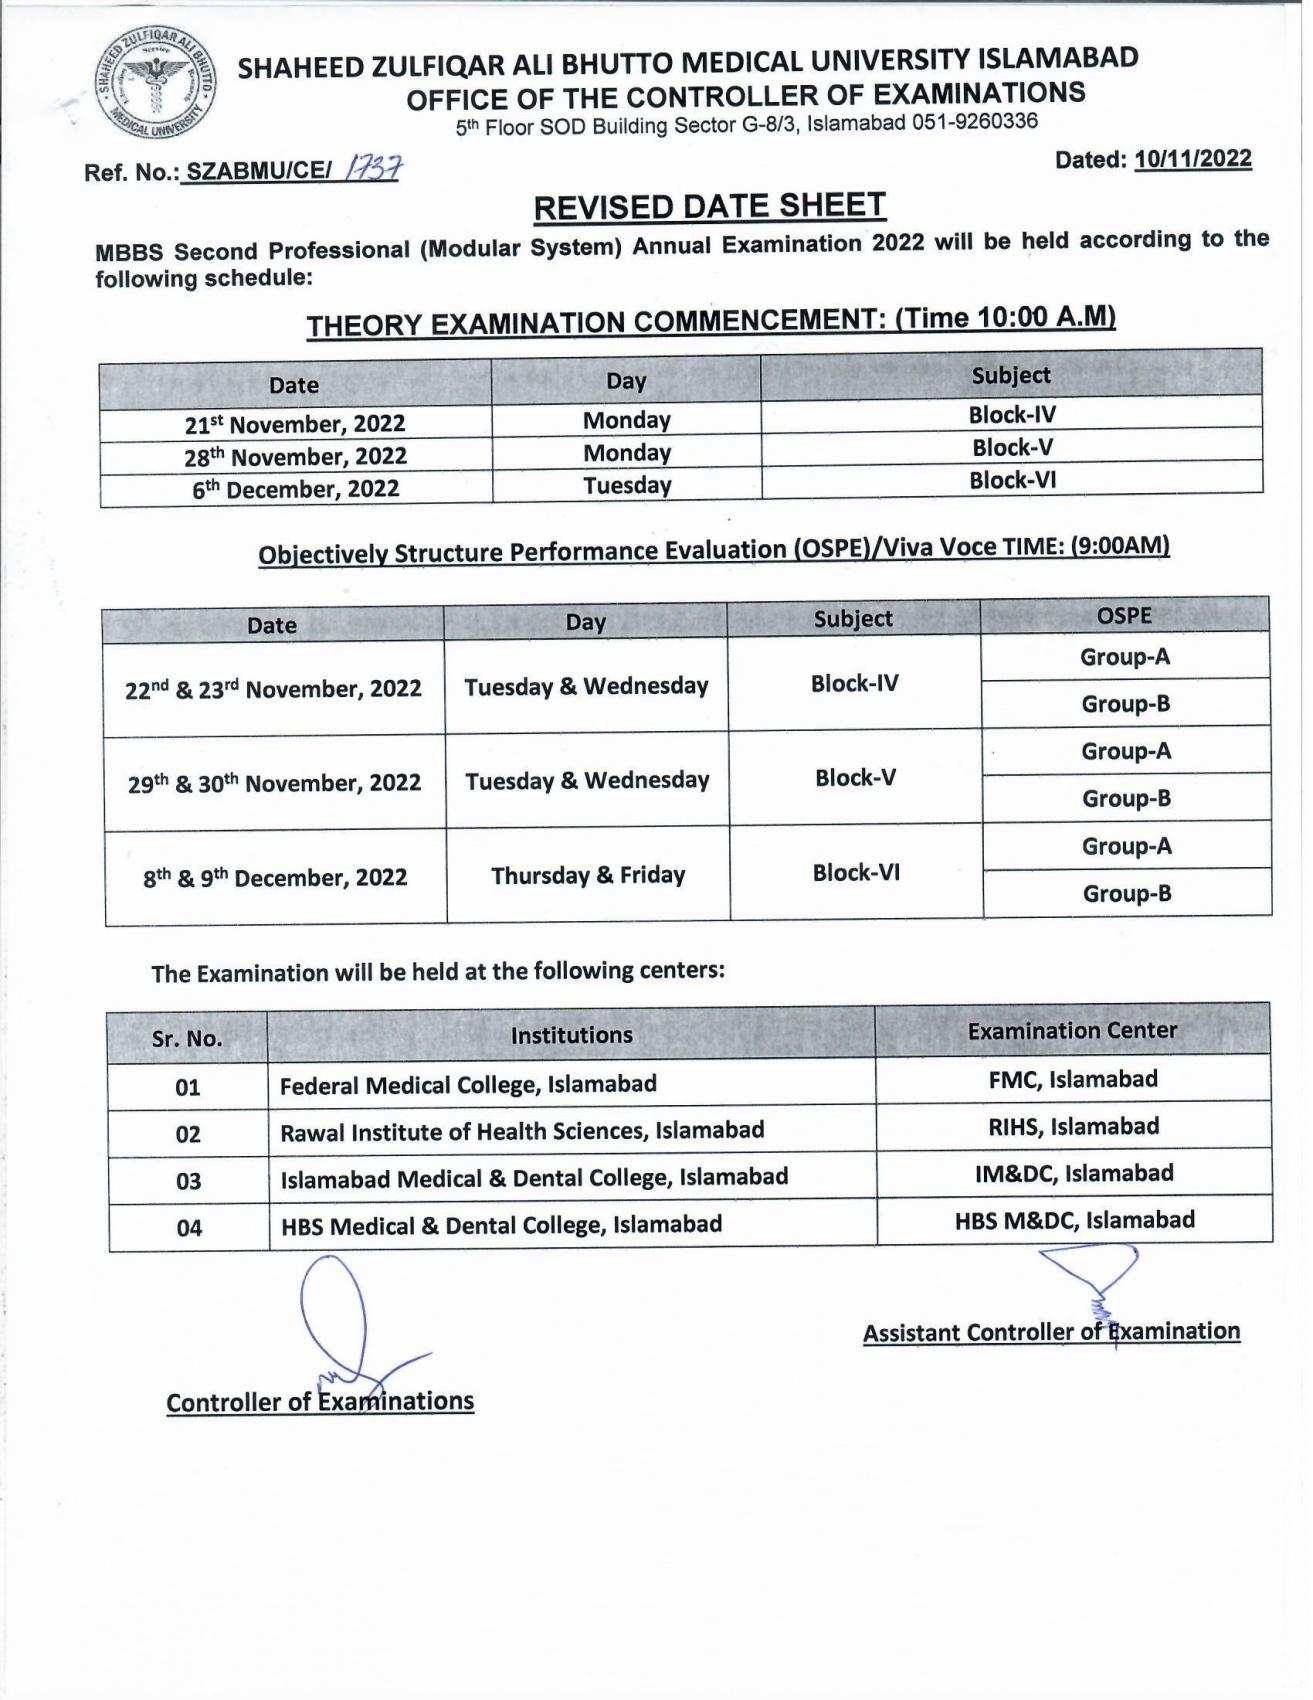 Revised Date Sheet - MBBS Second Professional (Modular System) Annual Examination 2022